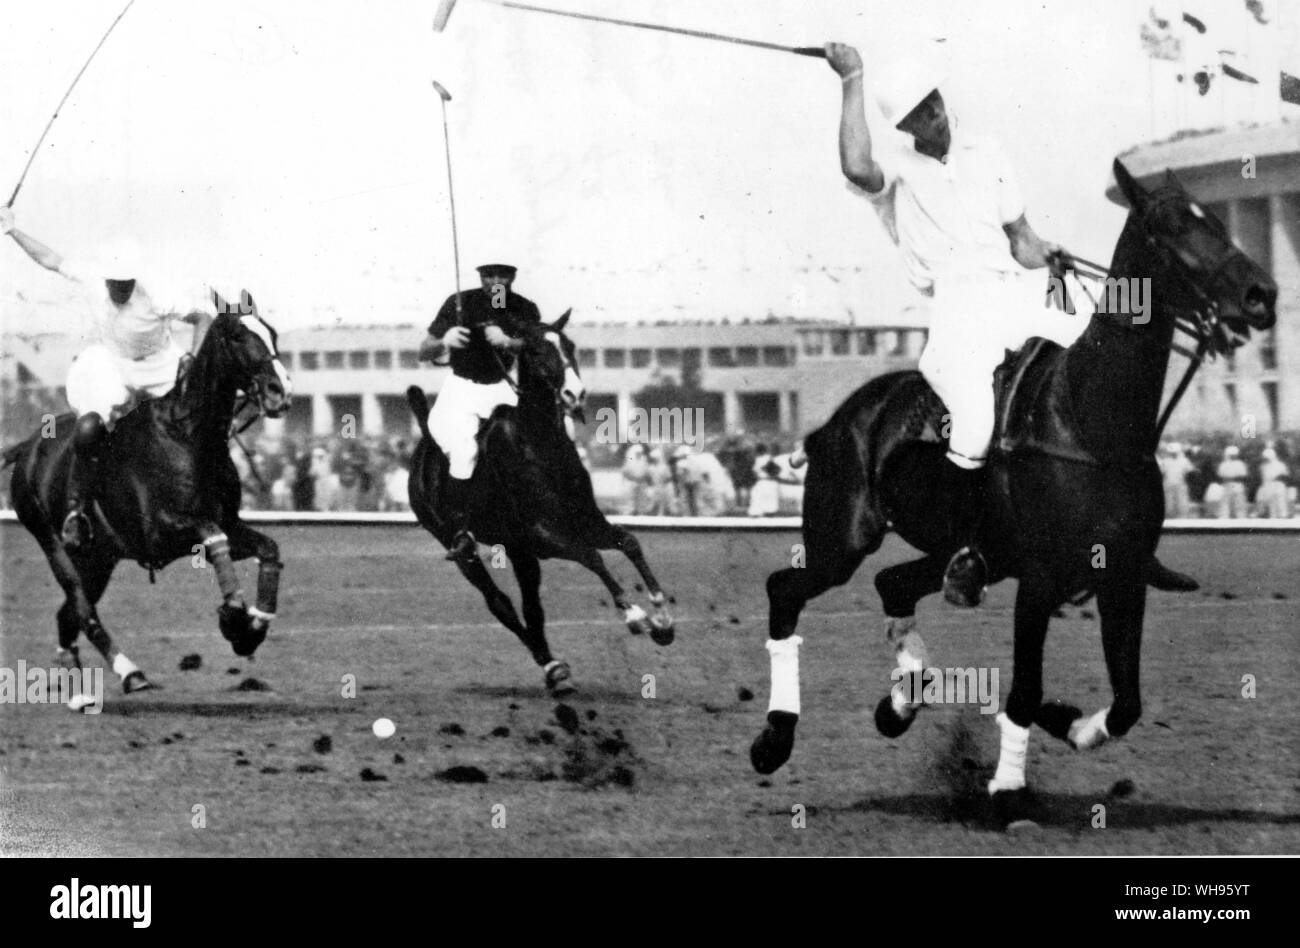 With matchless team play and superb riding the Argentinian players light shirts ward off the attack of a Mexican horseman Polo Berlin Olympic Games 1936 Stock Photo